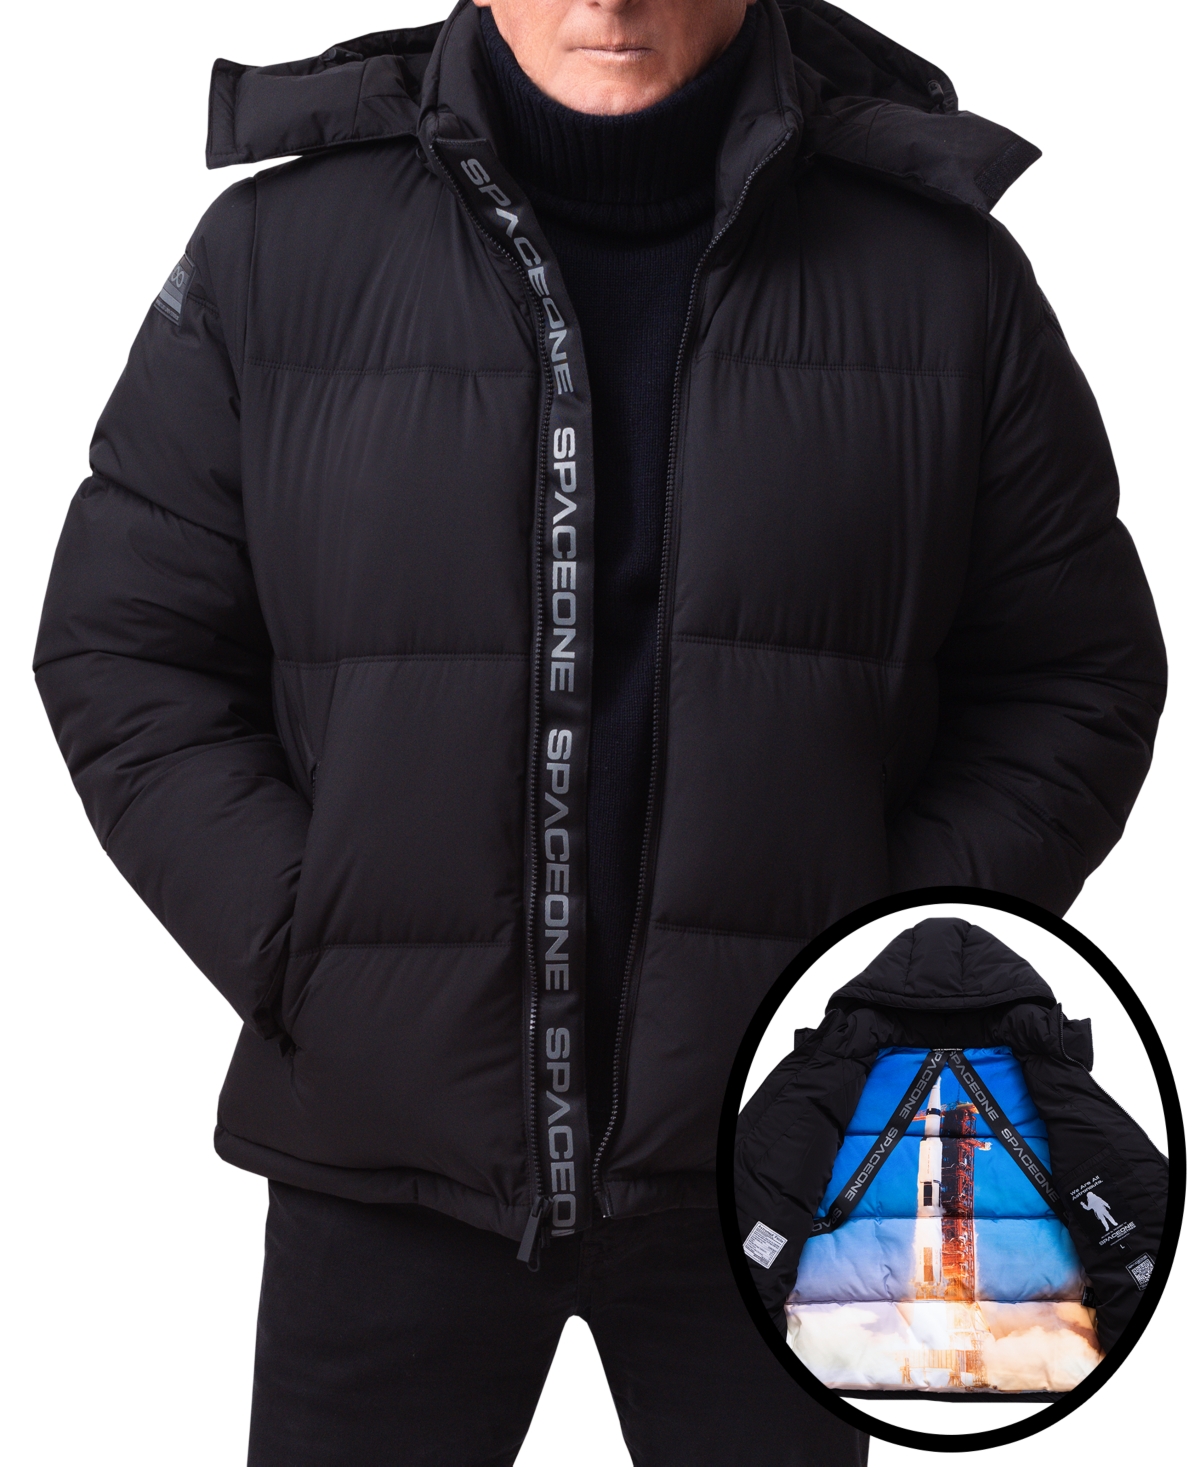 Men's Nasa Inspired Hooded Puffer Jacket with Printed Astronaut Interior - Gray